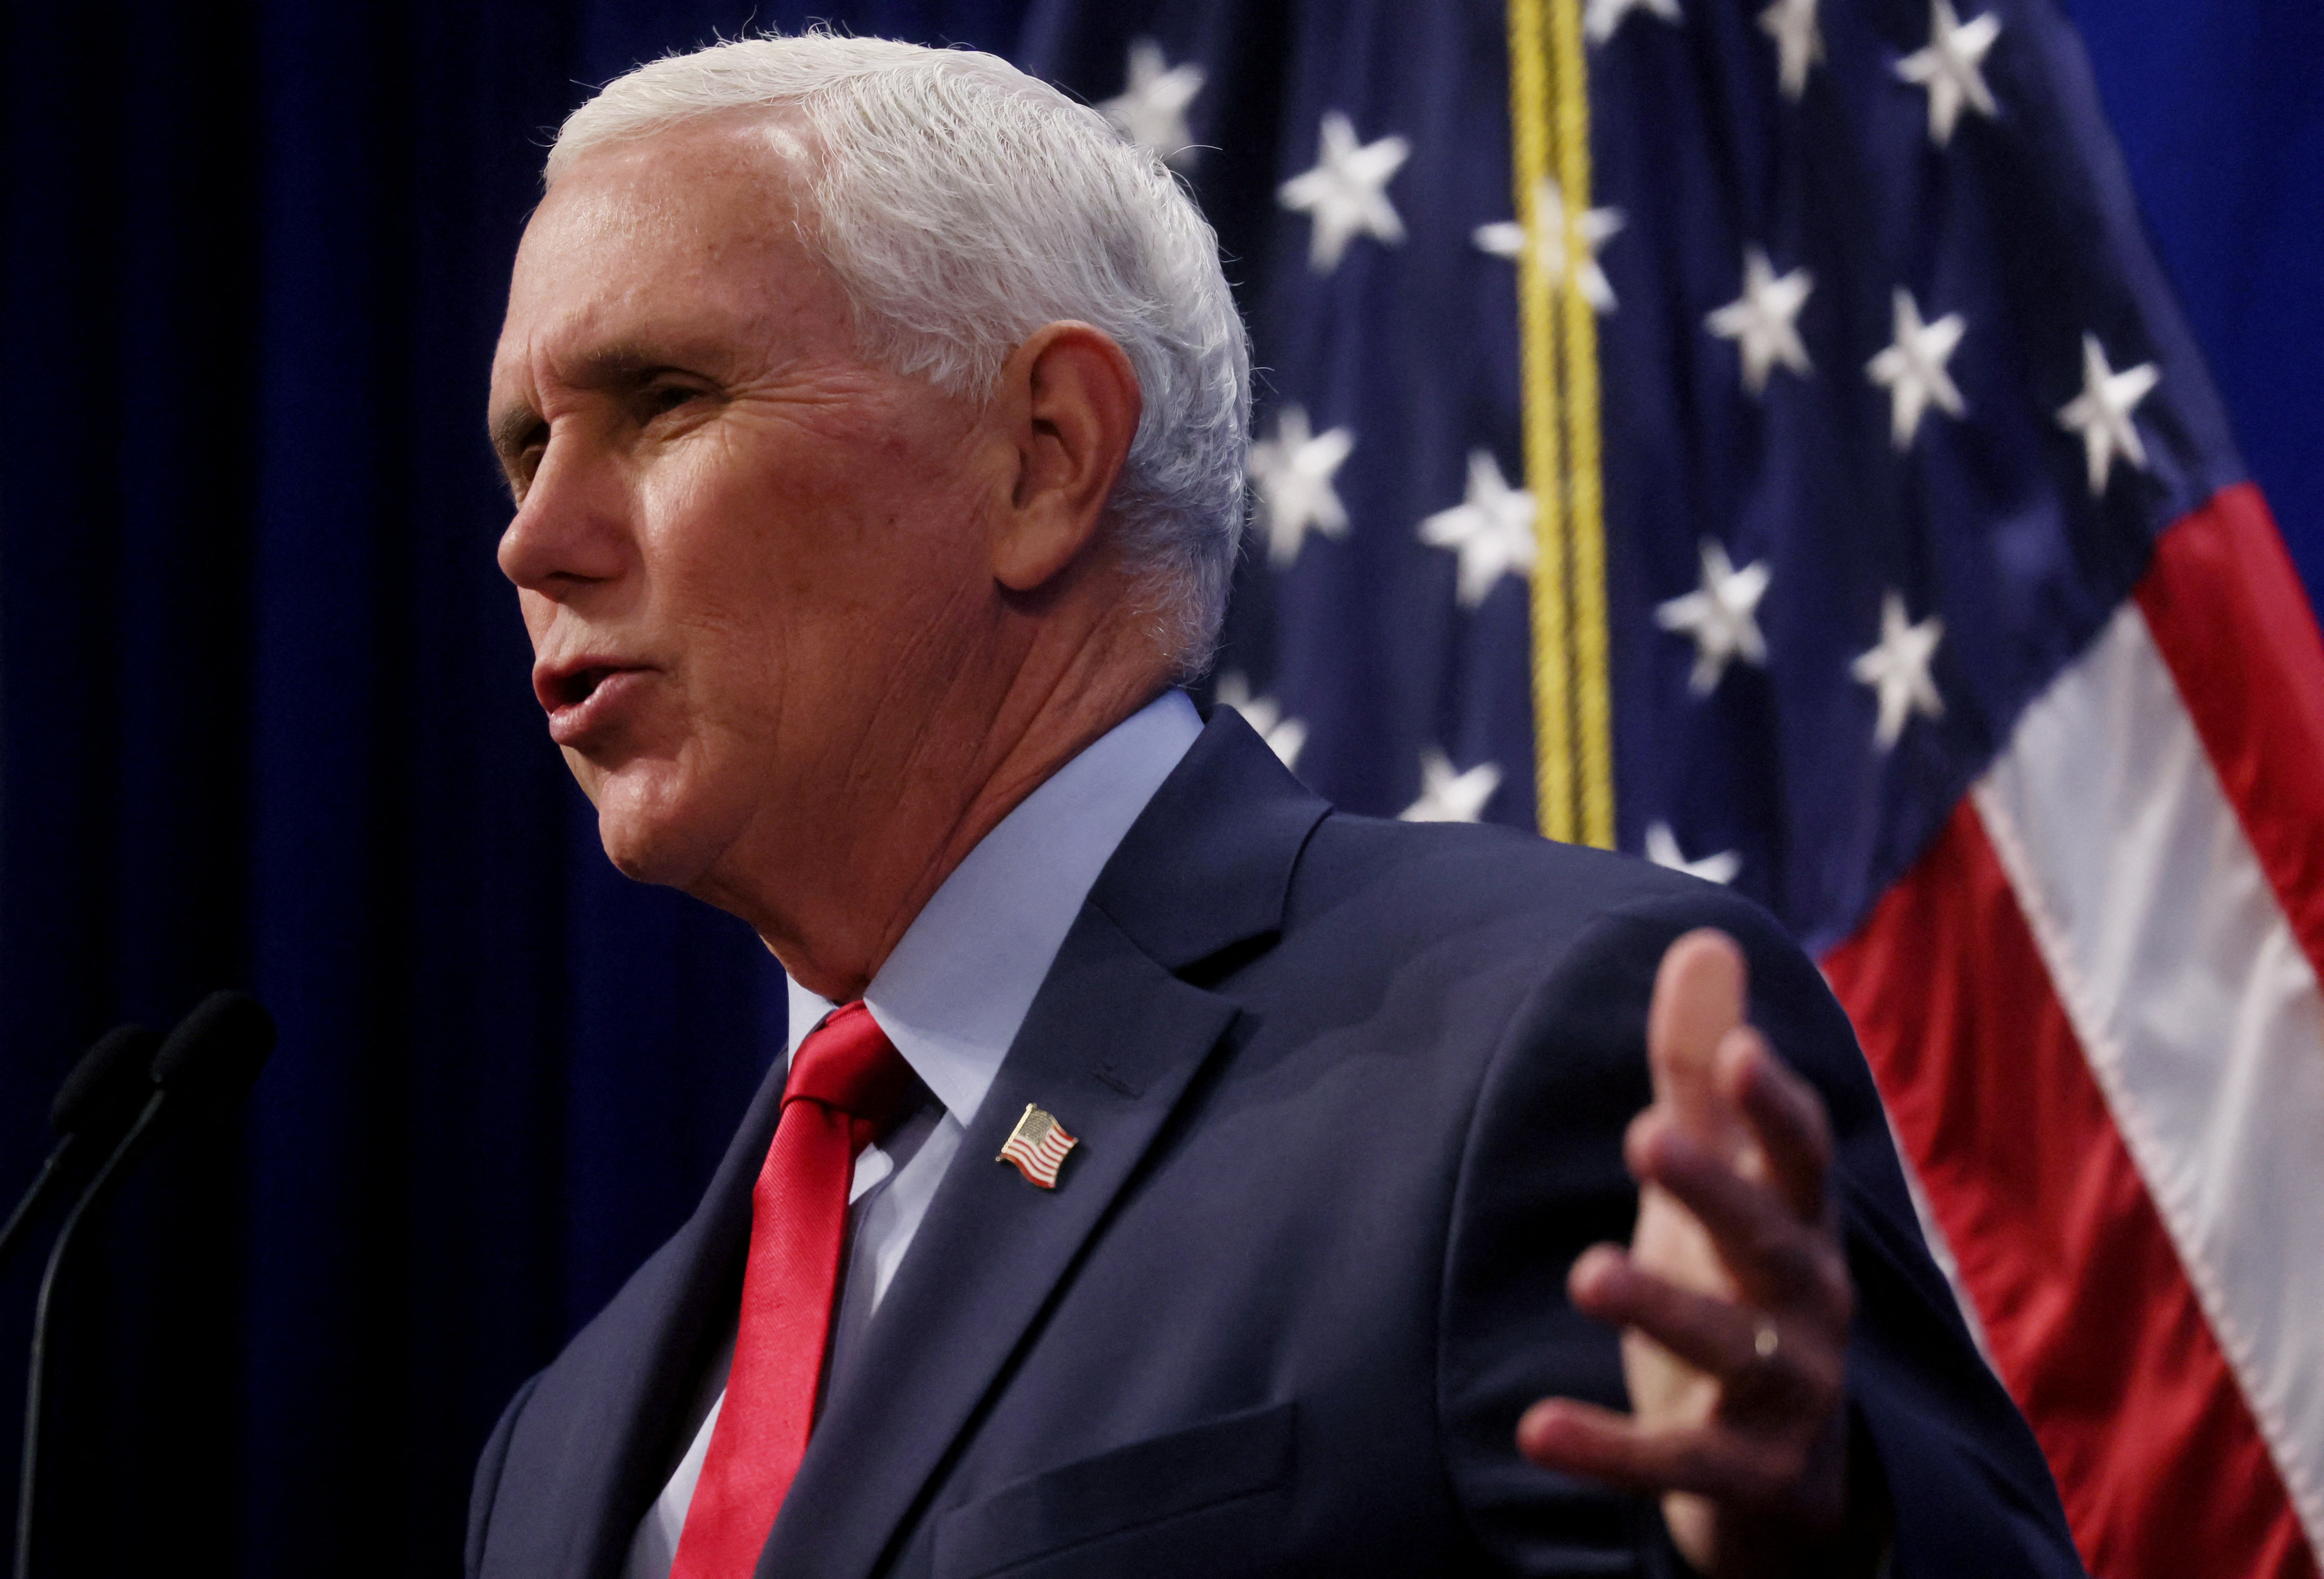 Former U.S. Vice President Pence speaks at the Heritage Foundation